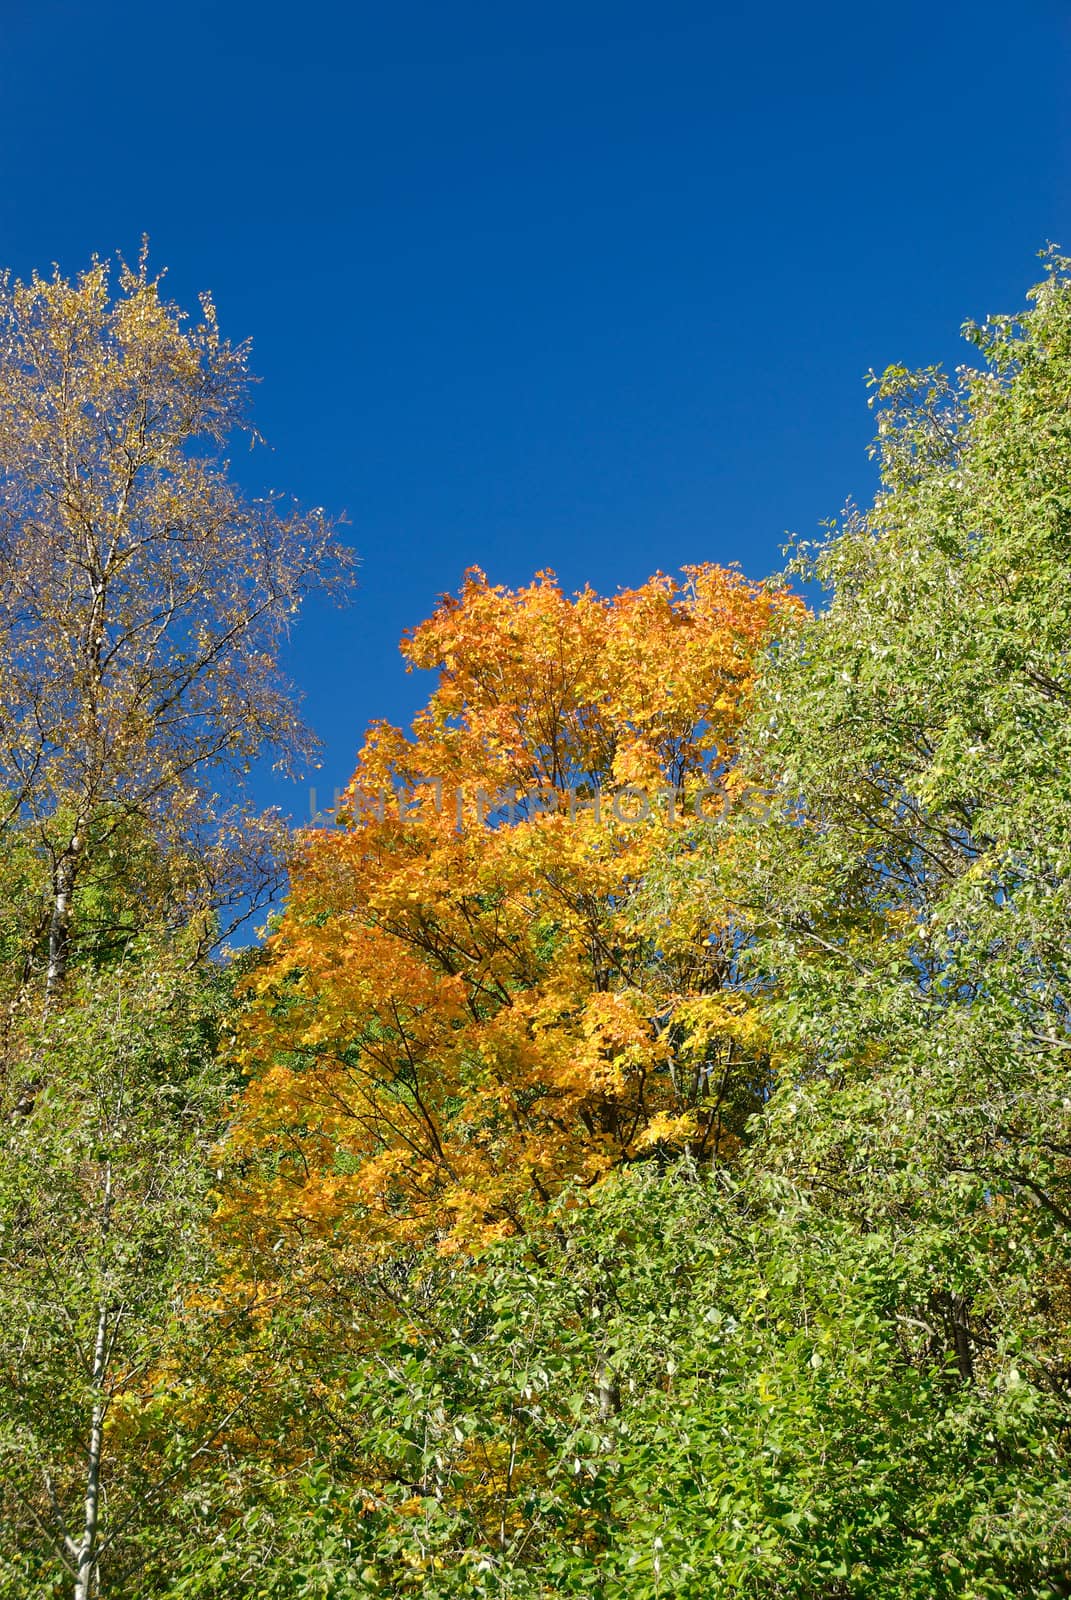 Yellow maple, surrounded by greener trees and polarised blue sky.
